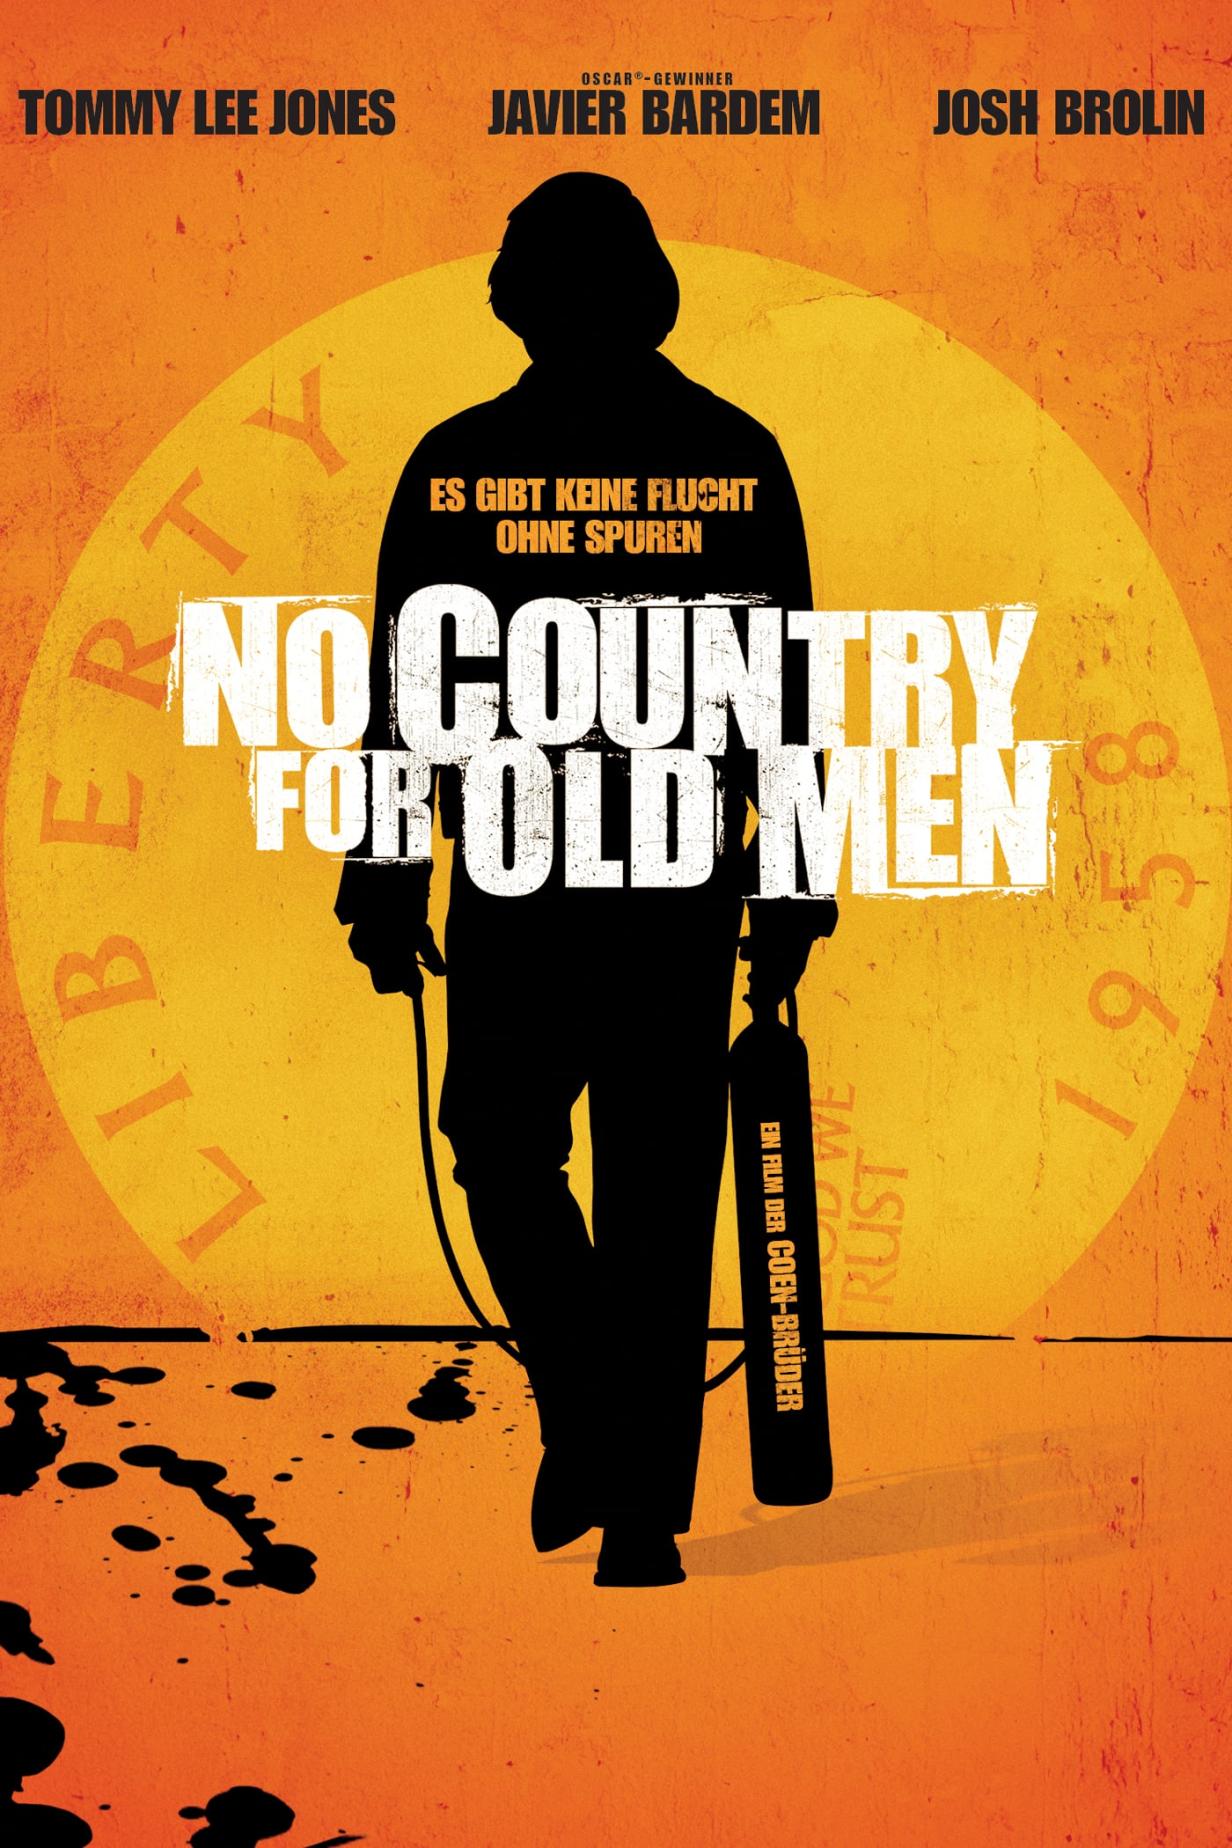 no country for old men by cormac mccarthy